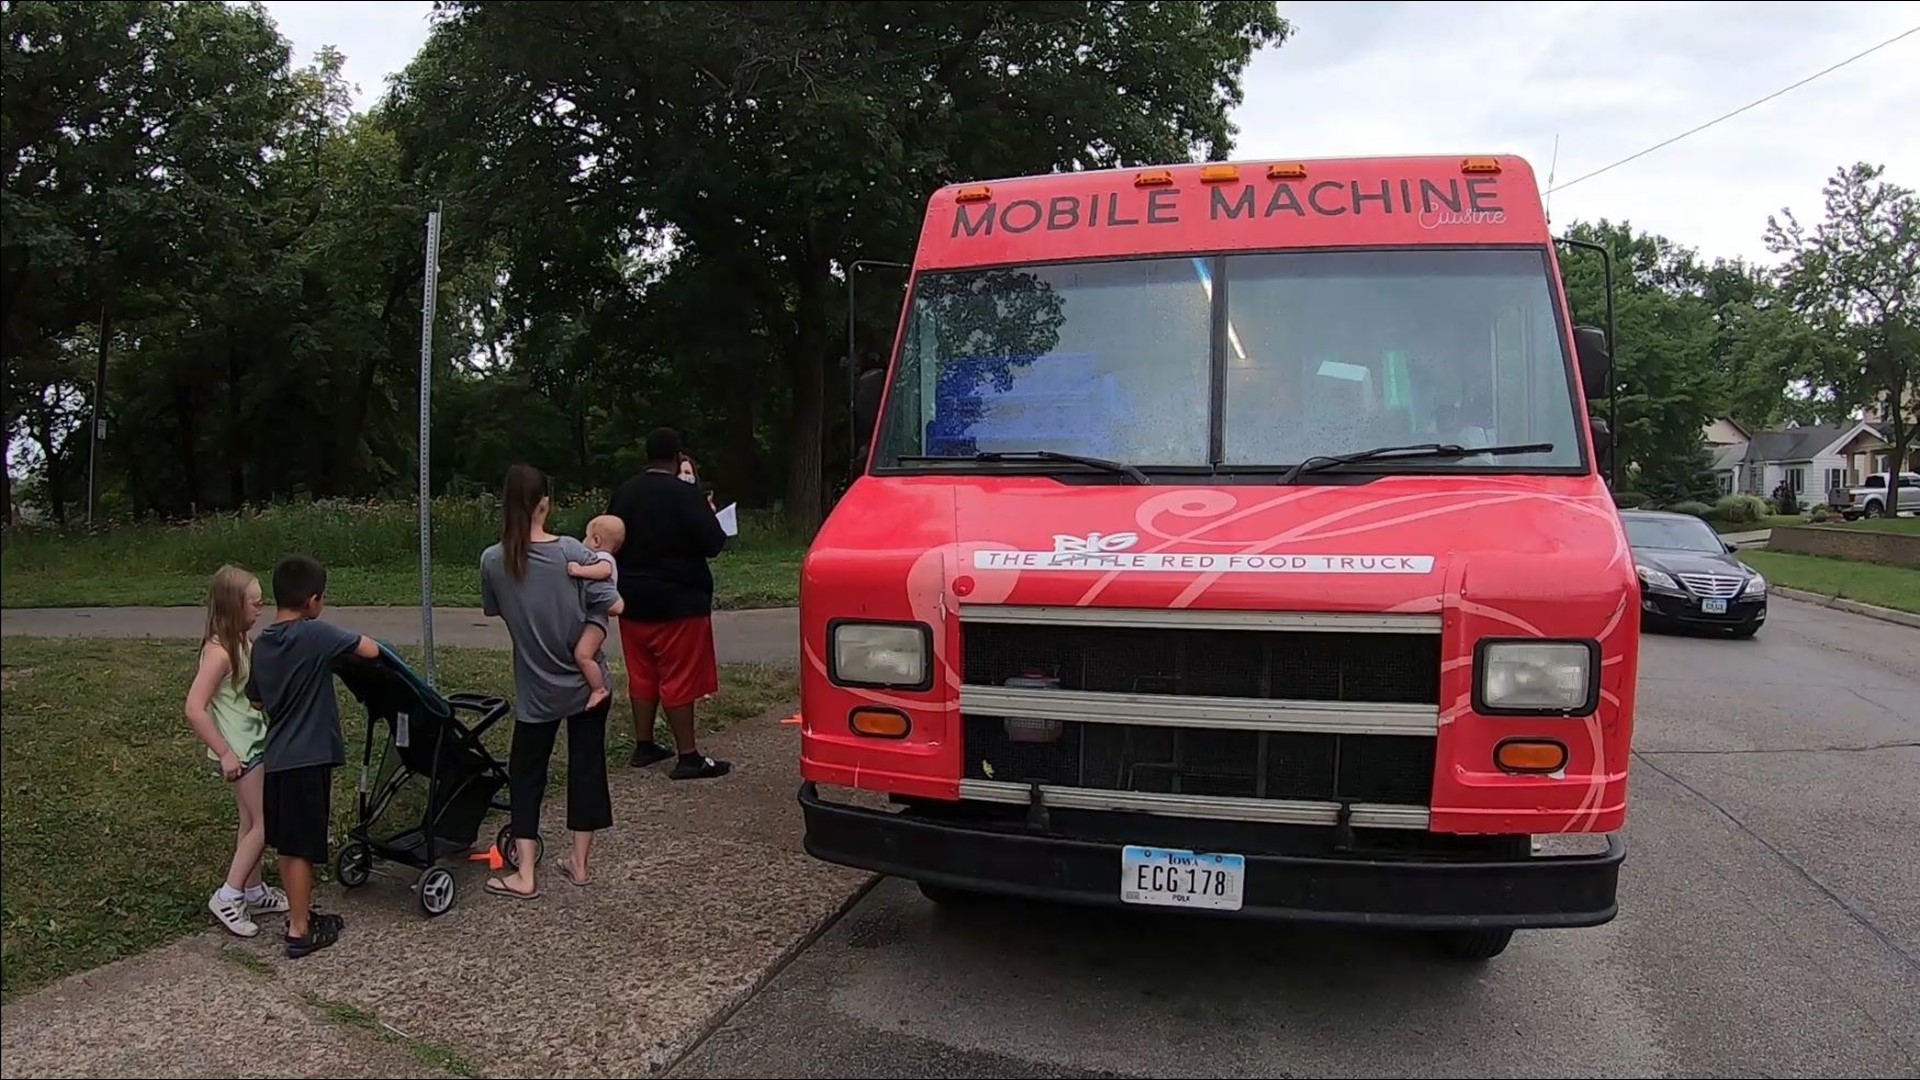 Local restaurants like the Big Red Food Truck are teaming up with the City of Des Moines and CISS to provide meals for those in need.